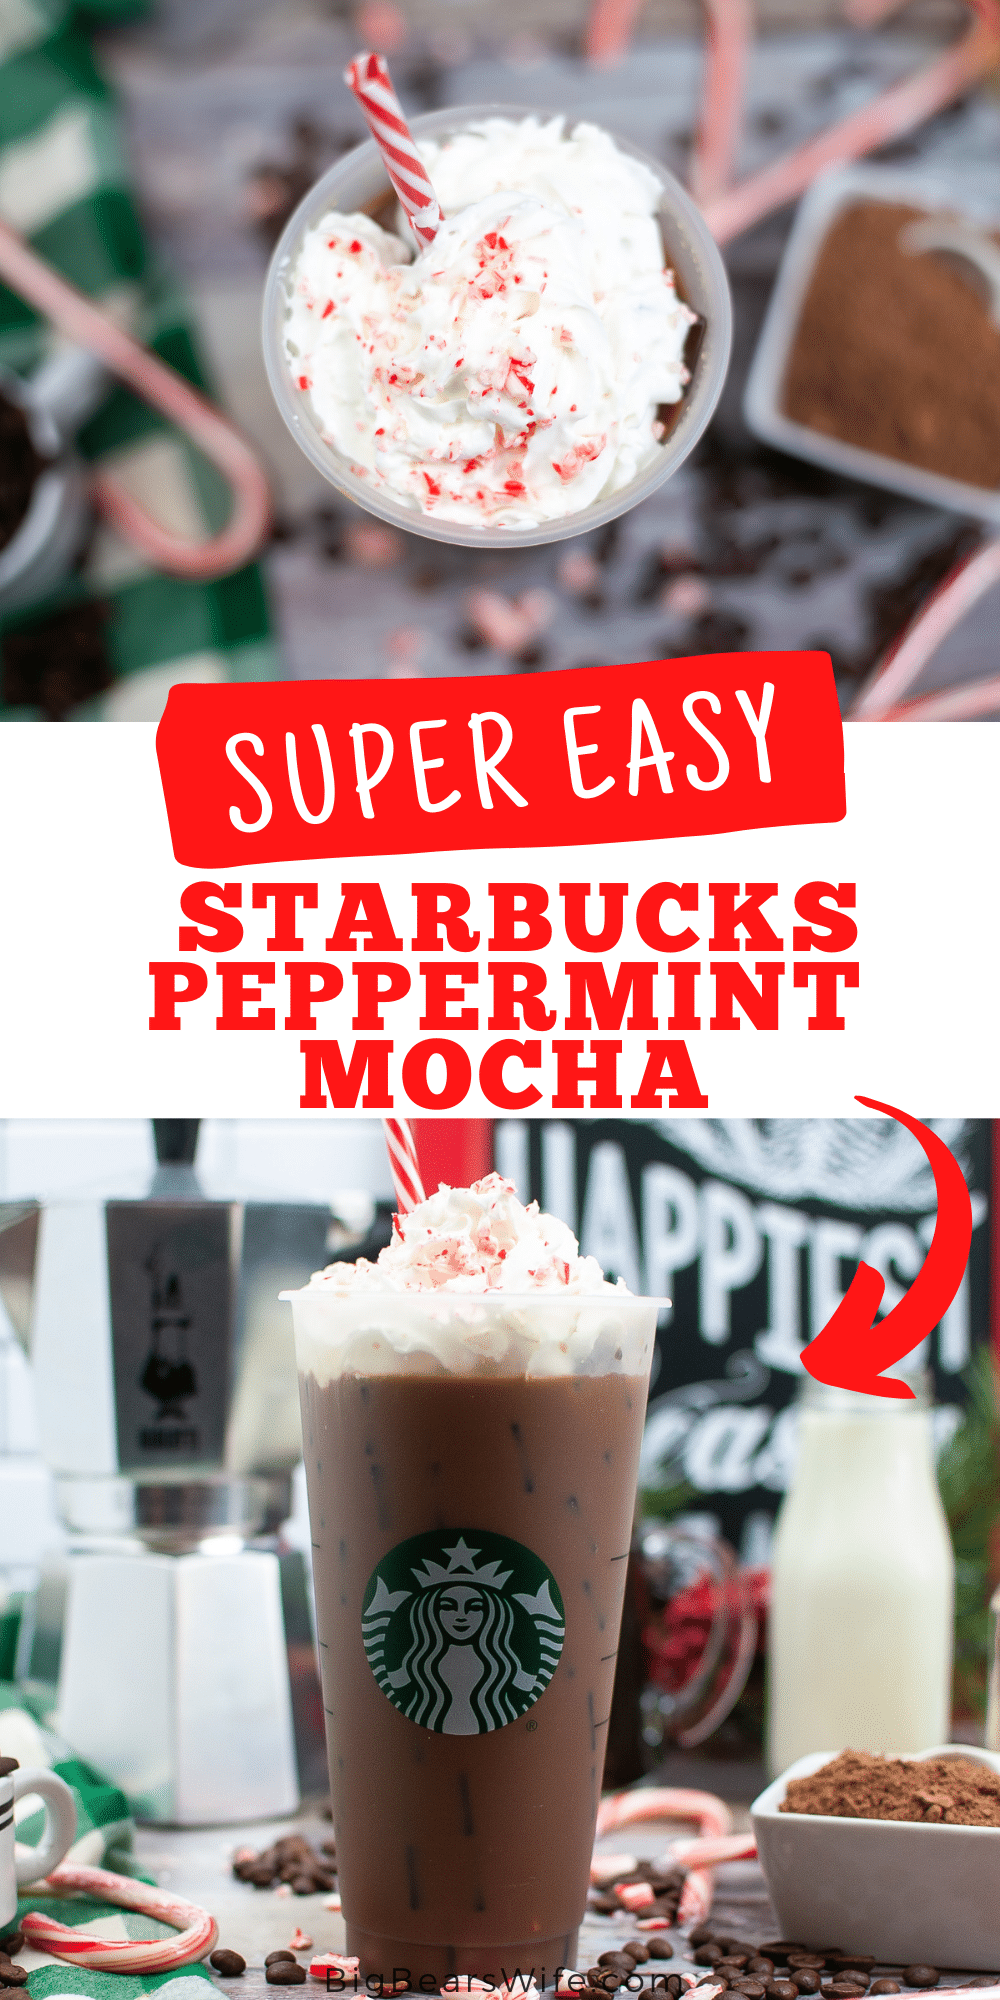 This tasty peppermint mocha is a homemade Copycat Starbucks Peppermint Mocha just like the one from the coffee shop! Espresso, cocoa, steamed milk and peppermint syrup come together to help make this class favorite!  via @bigbearswife